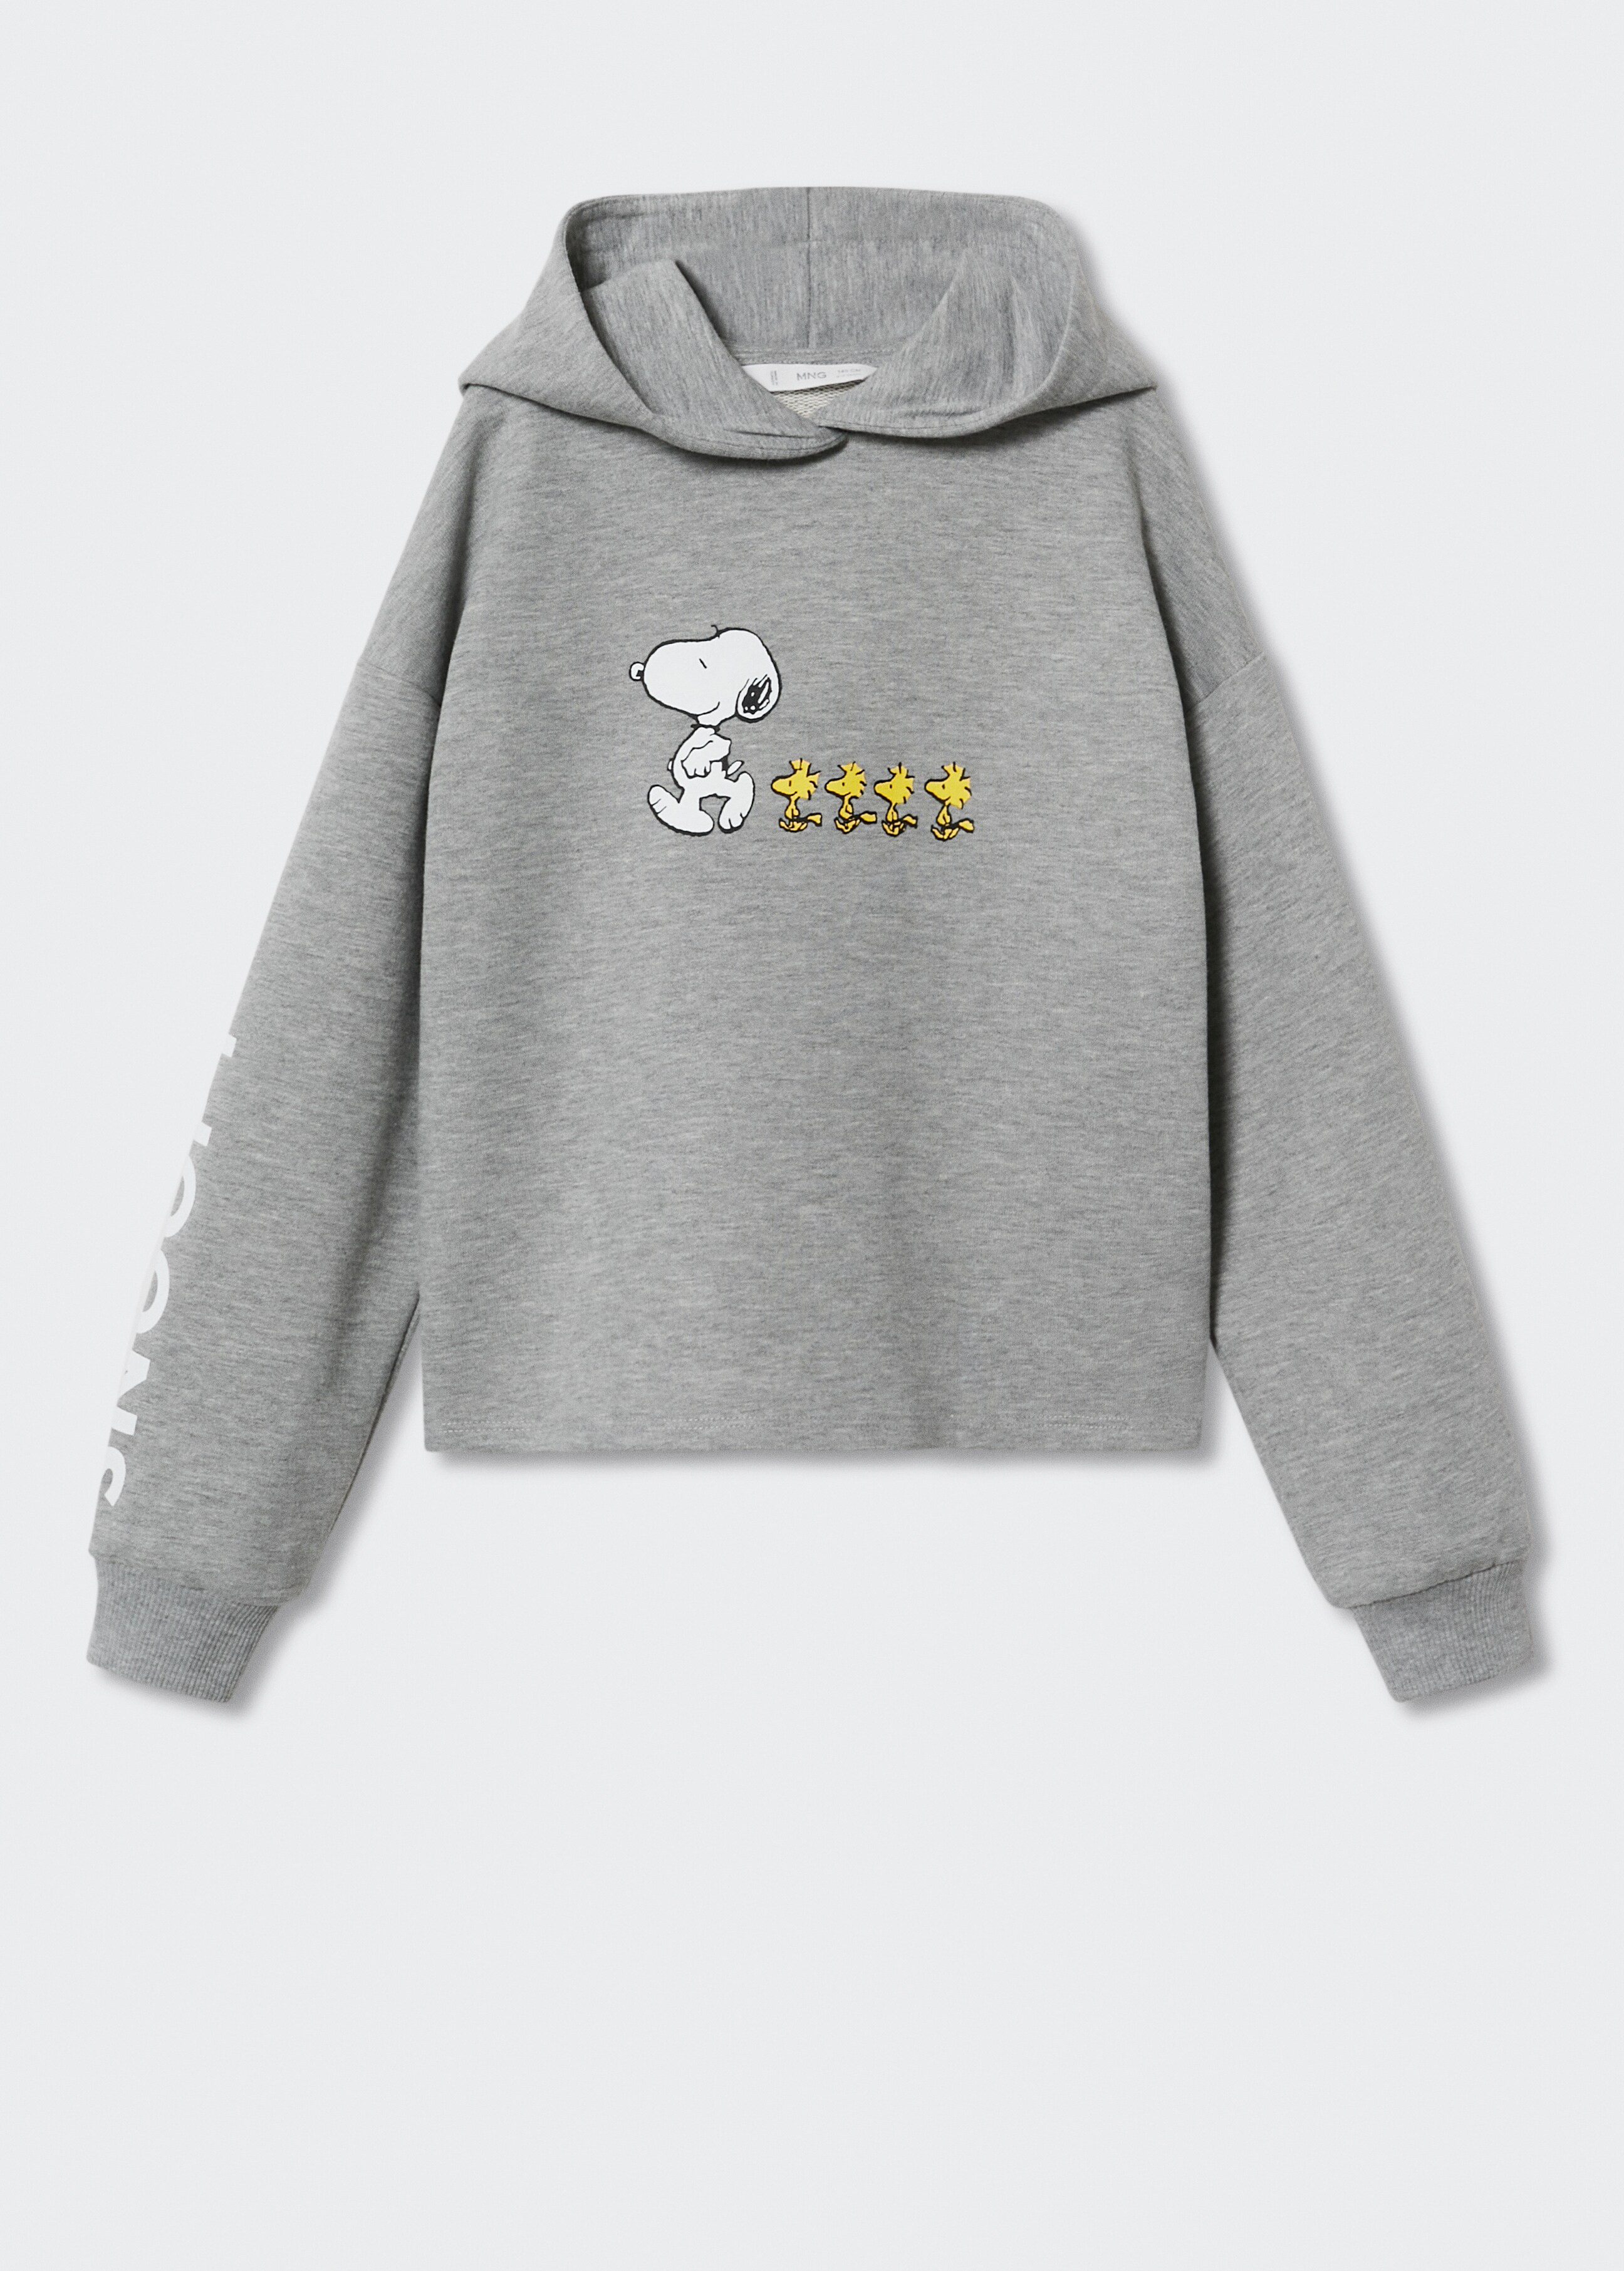 Hooded Snoopy sweatshirt - Article without model